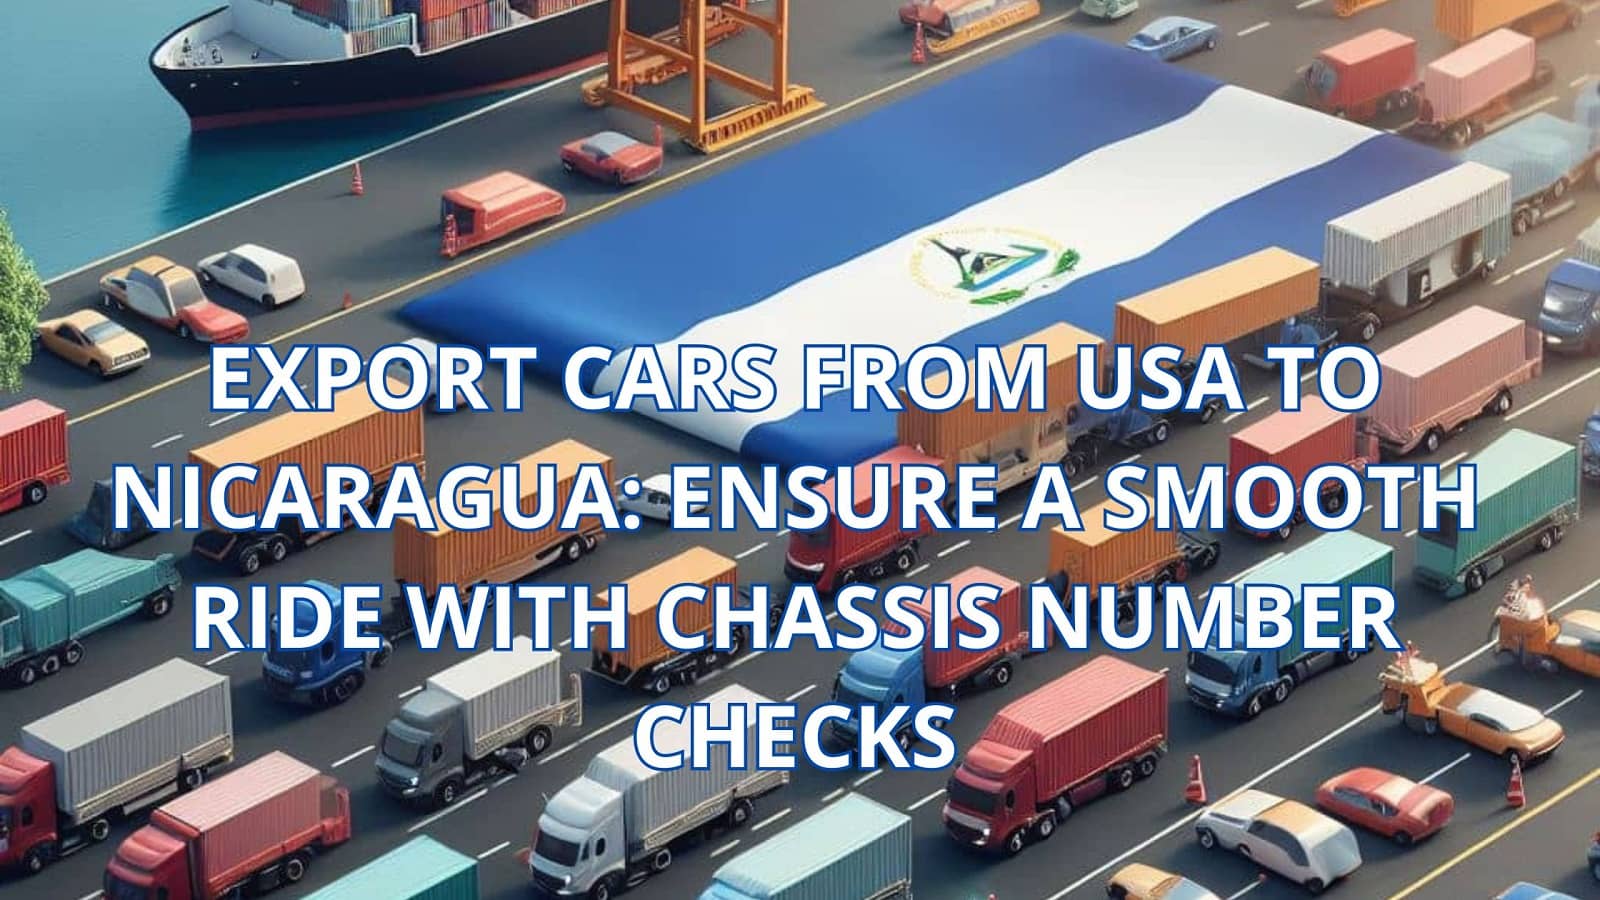 Export Cars from USA to Nicaragua Ensure a Smooth Ride with Chassis Number Checks